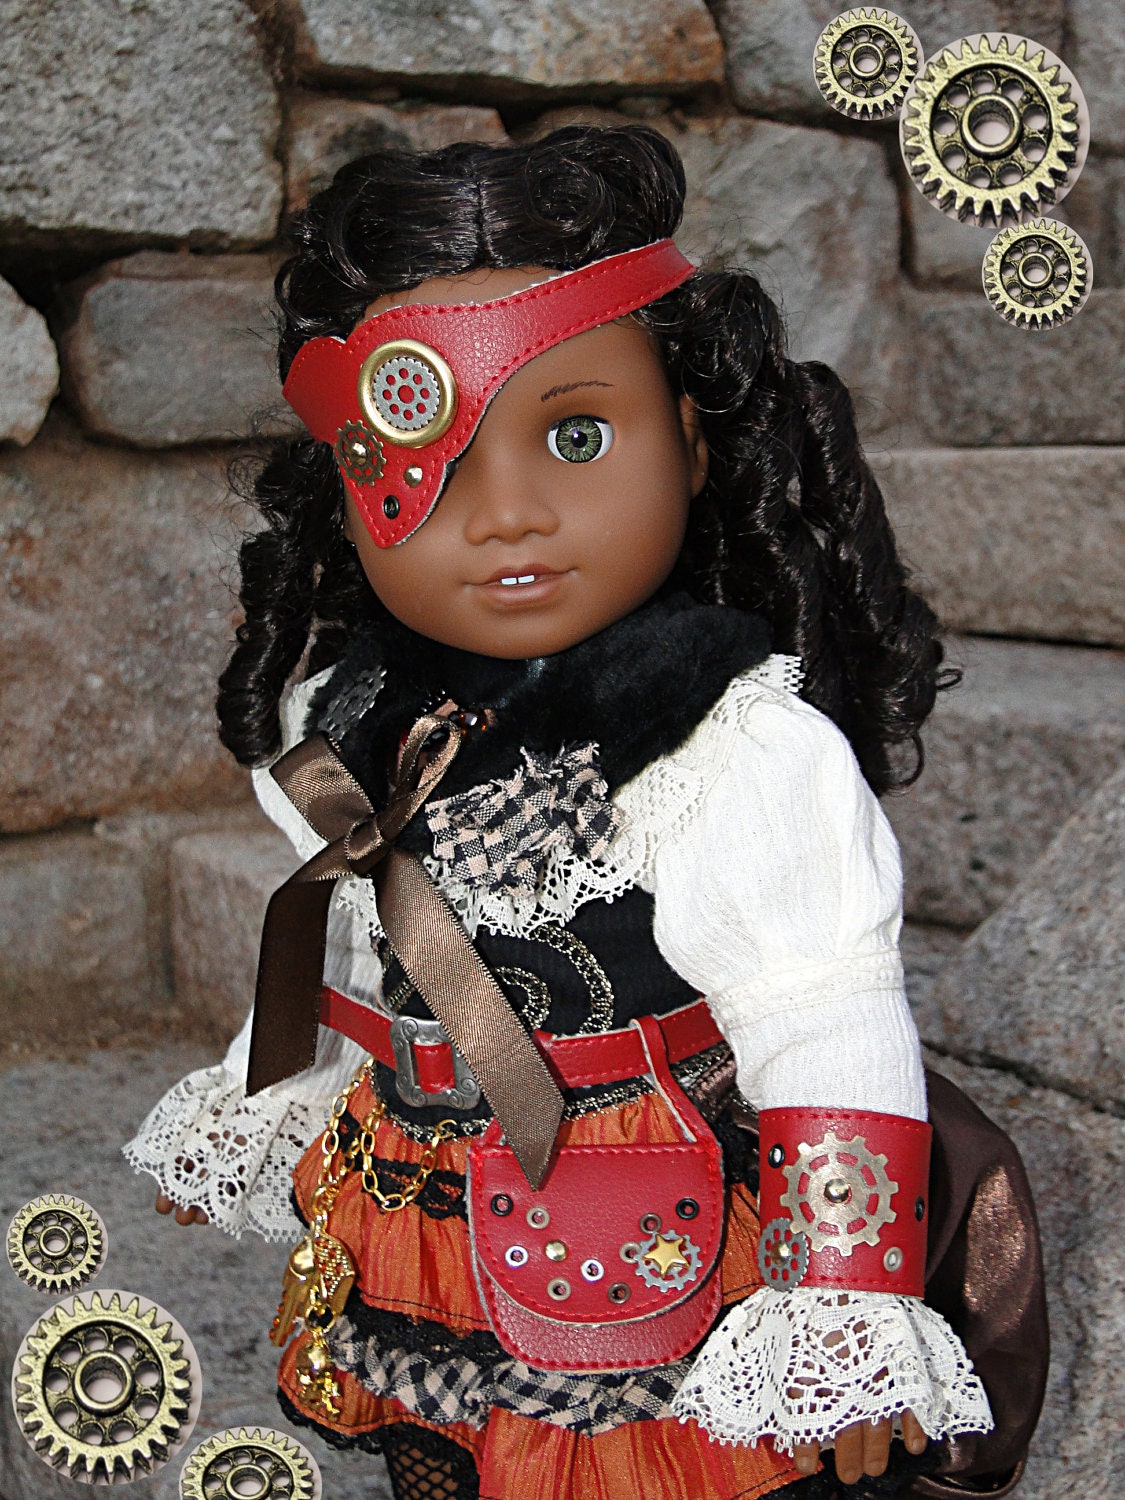 11 pcs Steampunk Victorian Style Costume for American Girl or other 18 inch doll